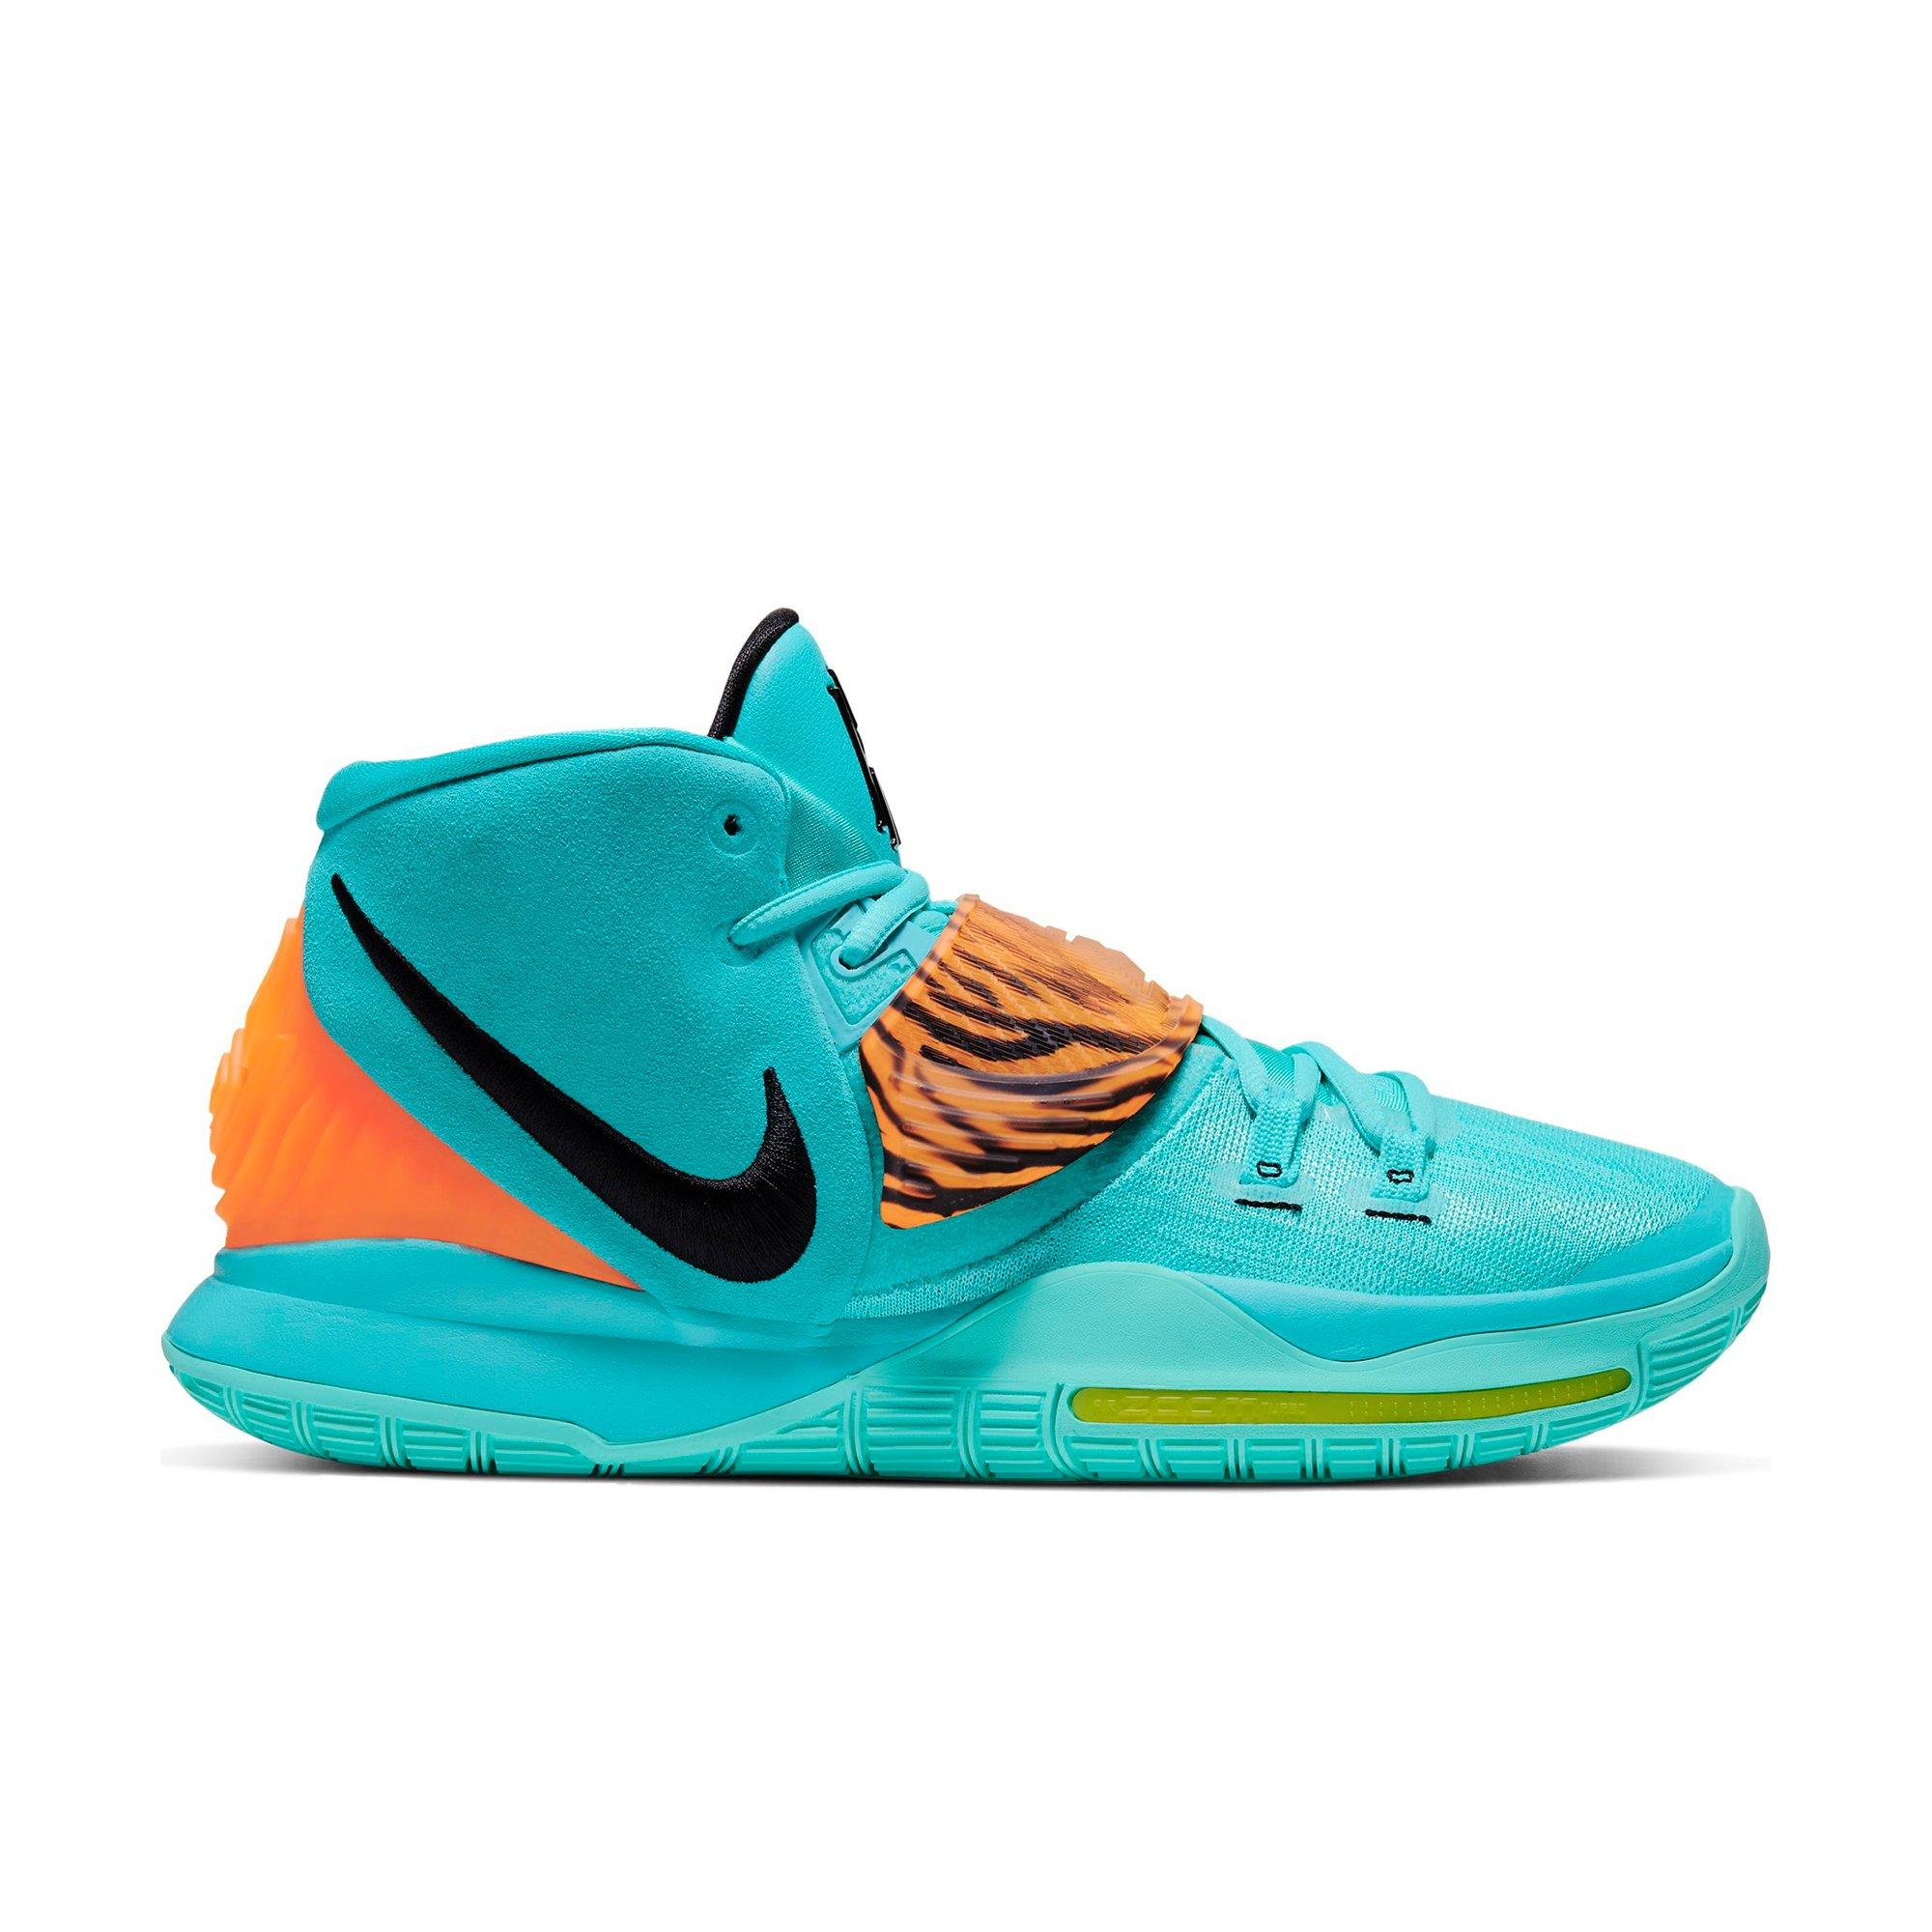 kyrie irving 6 shoes